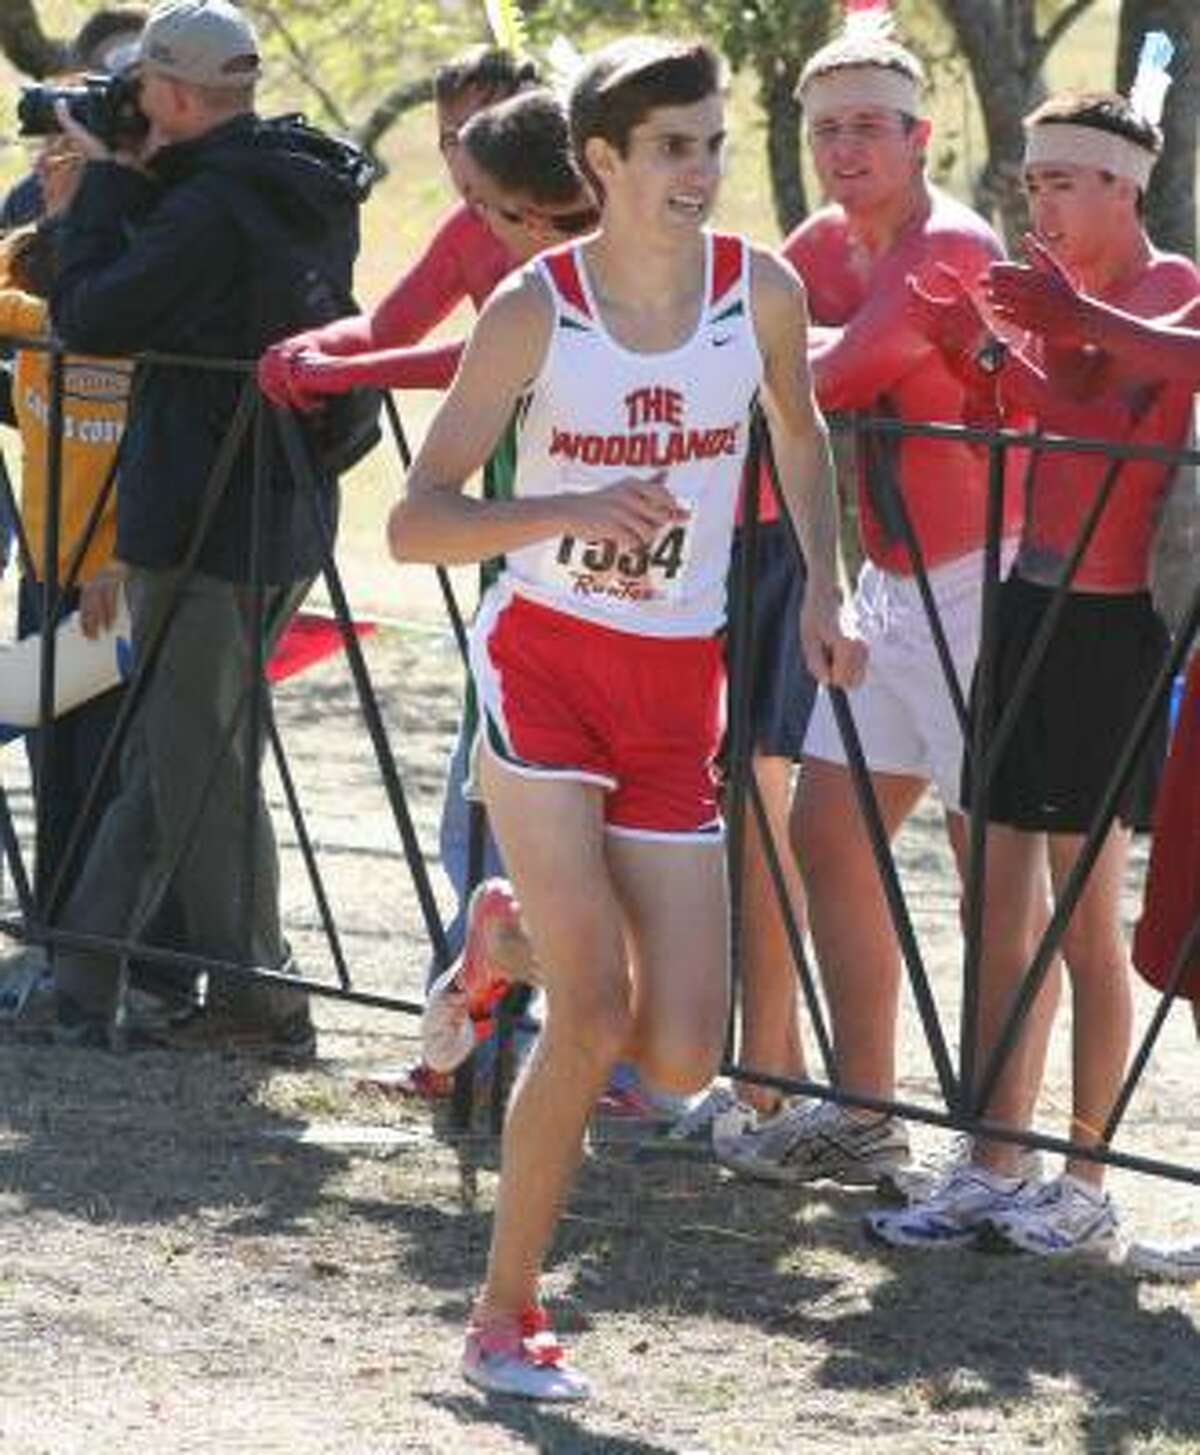 The Woodlands: Cross Country Reed Connor claimed the Class 5A boys individual state title with a time of (14:47.19).